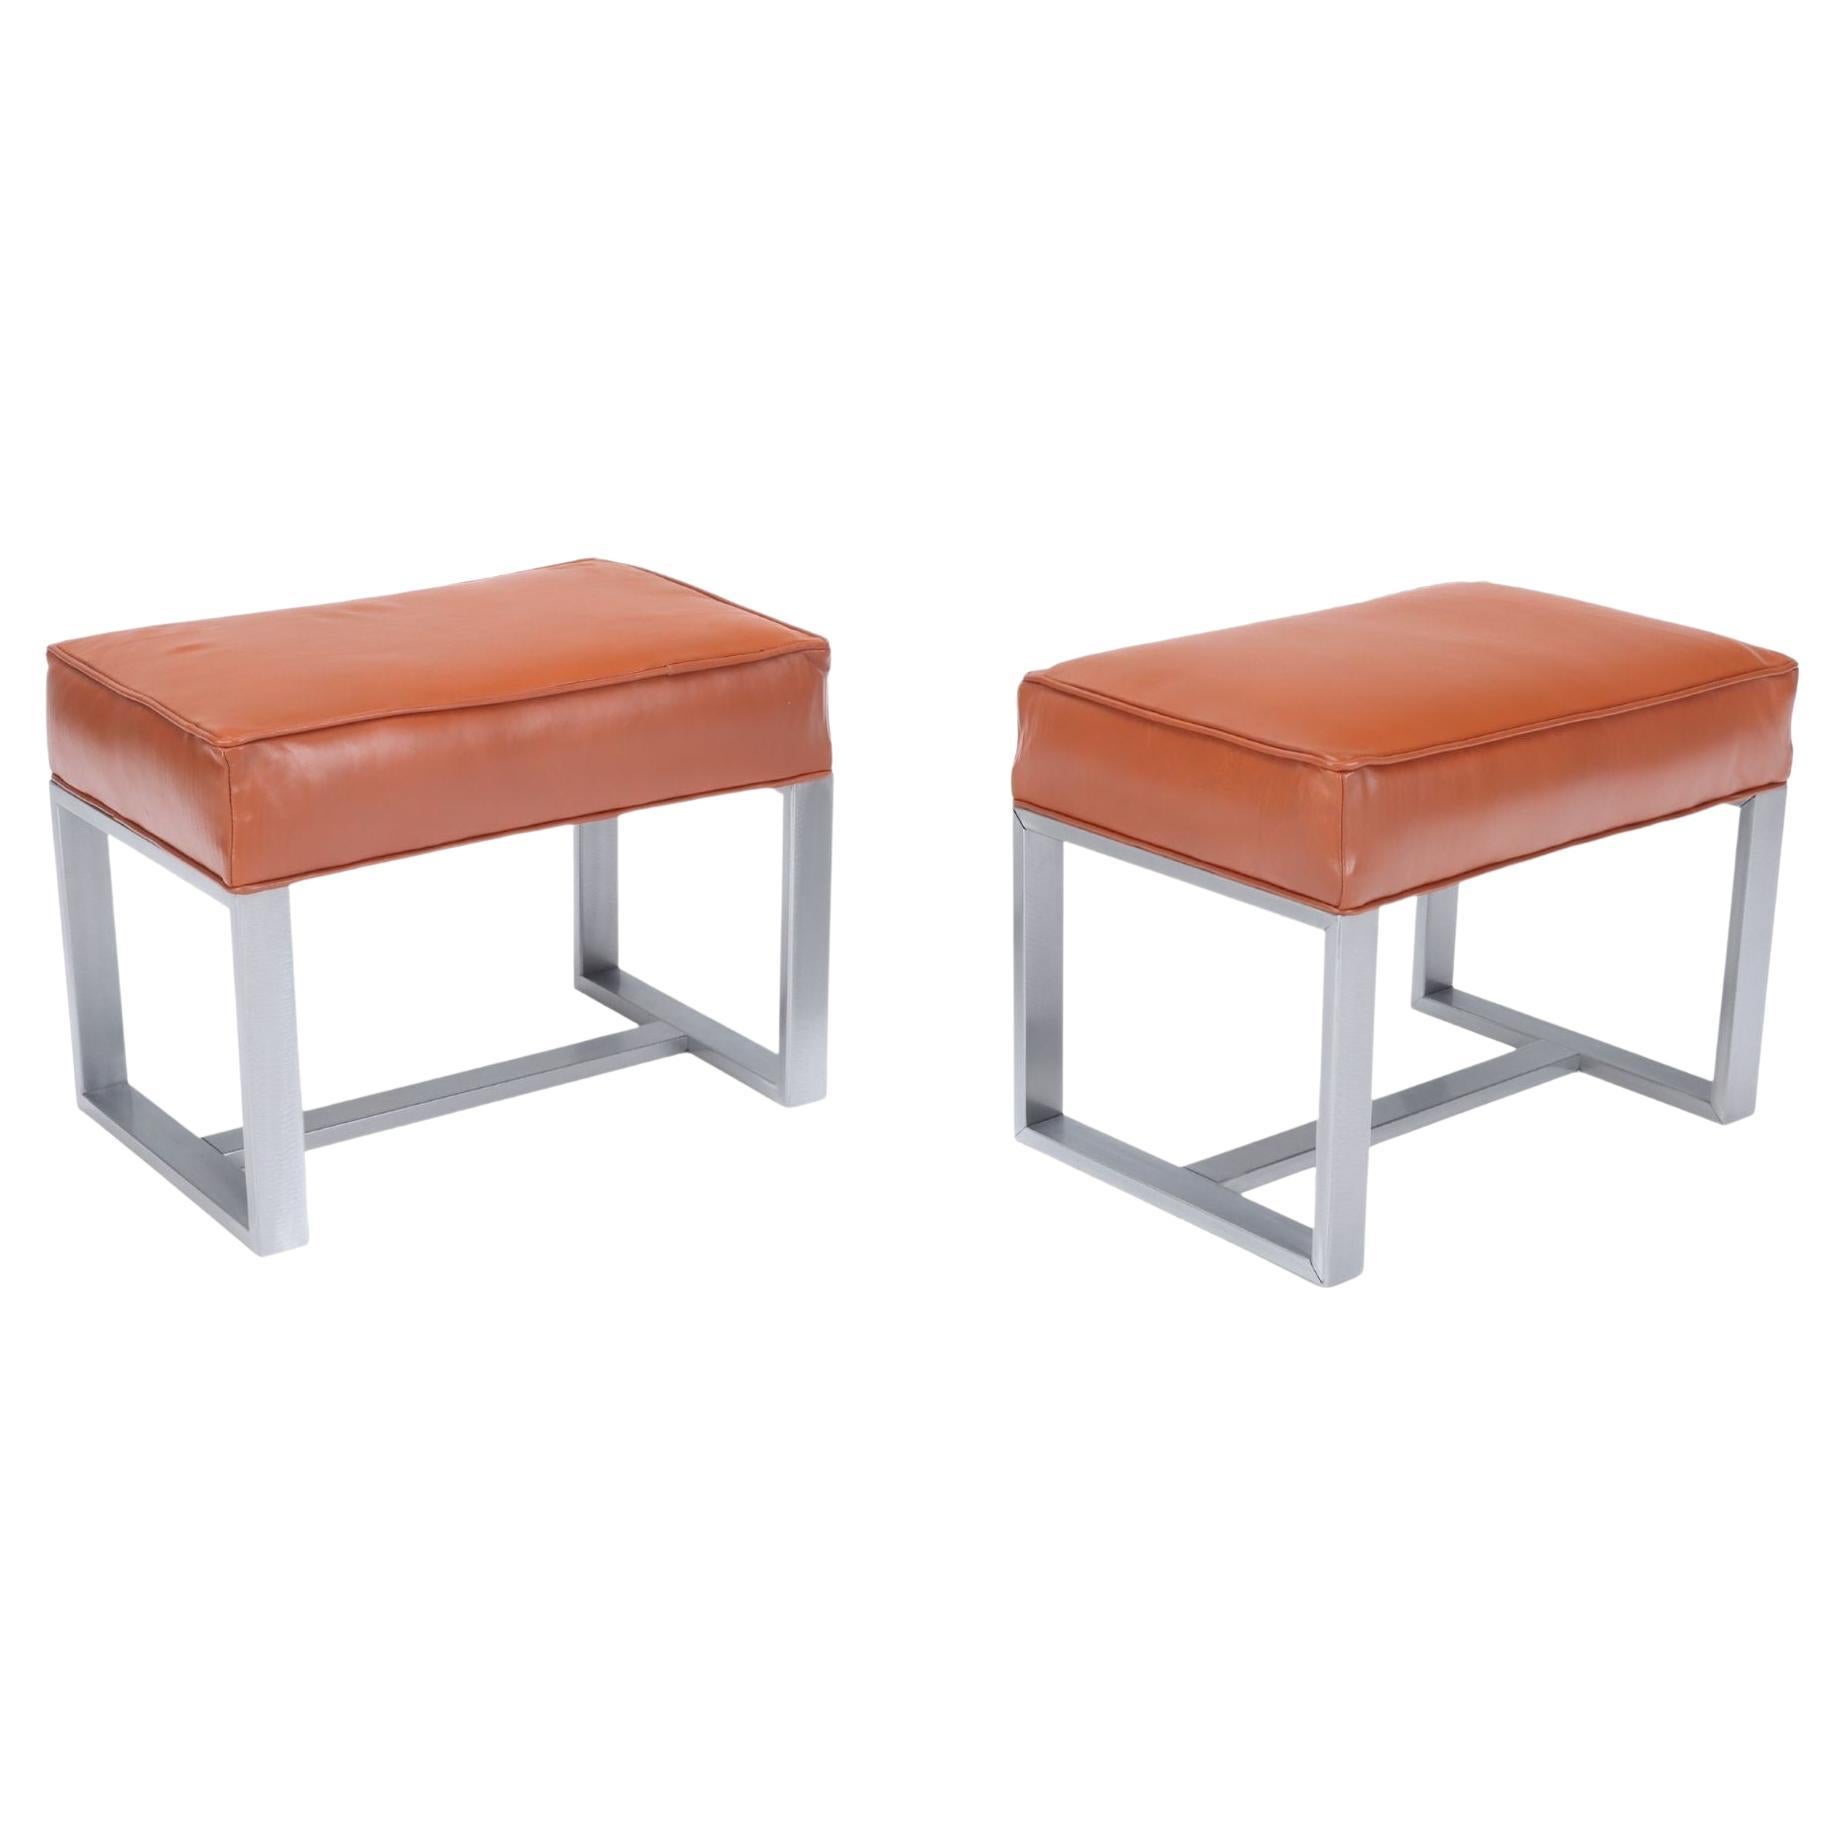 Pair of Chrome and Leather Covered Benches or Small Stools, Contemporary For Sale